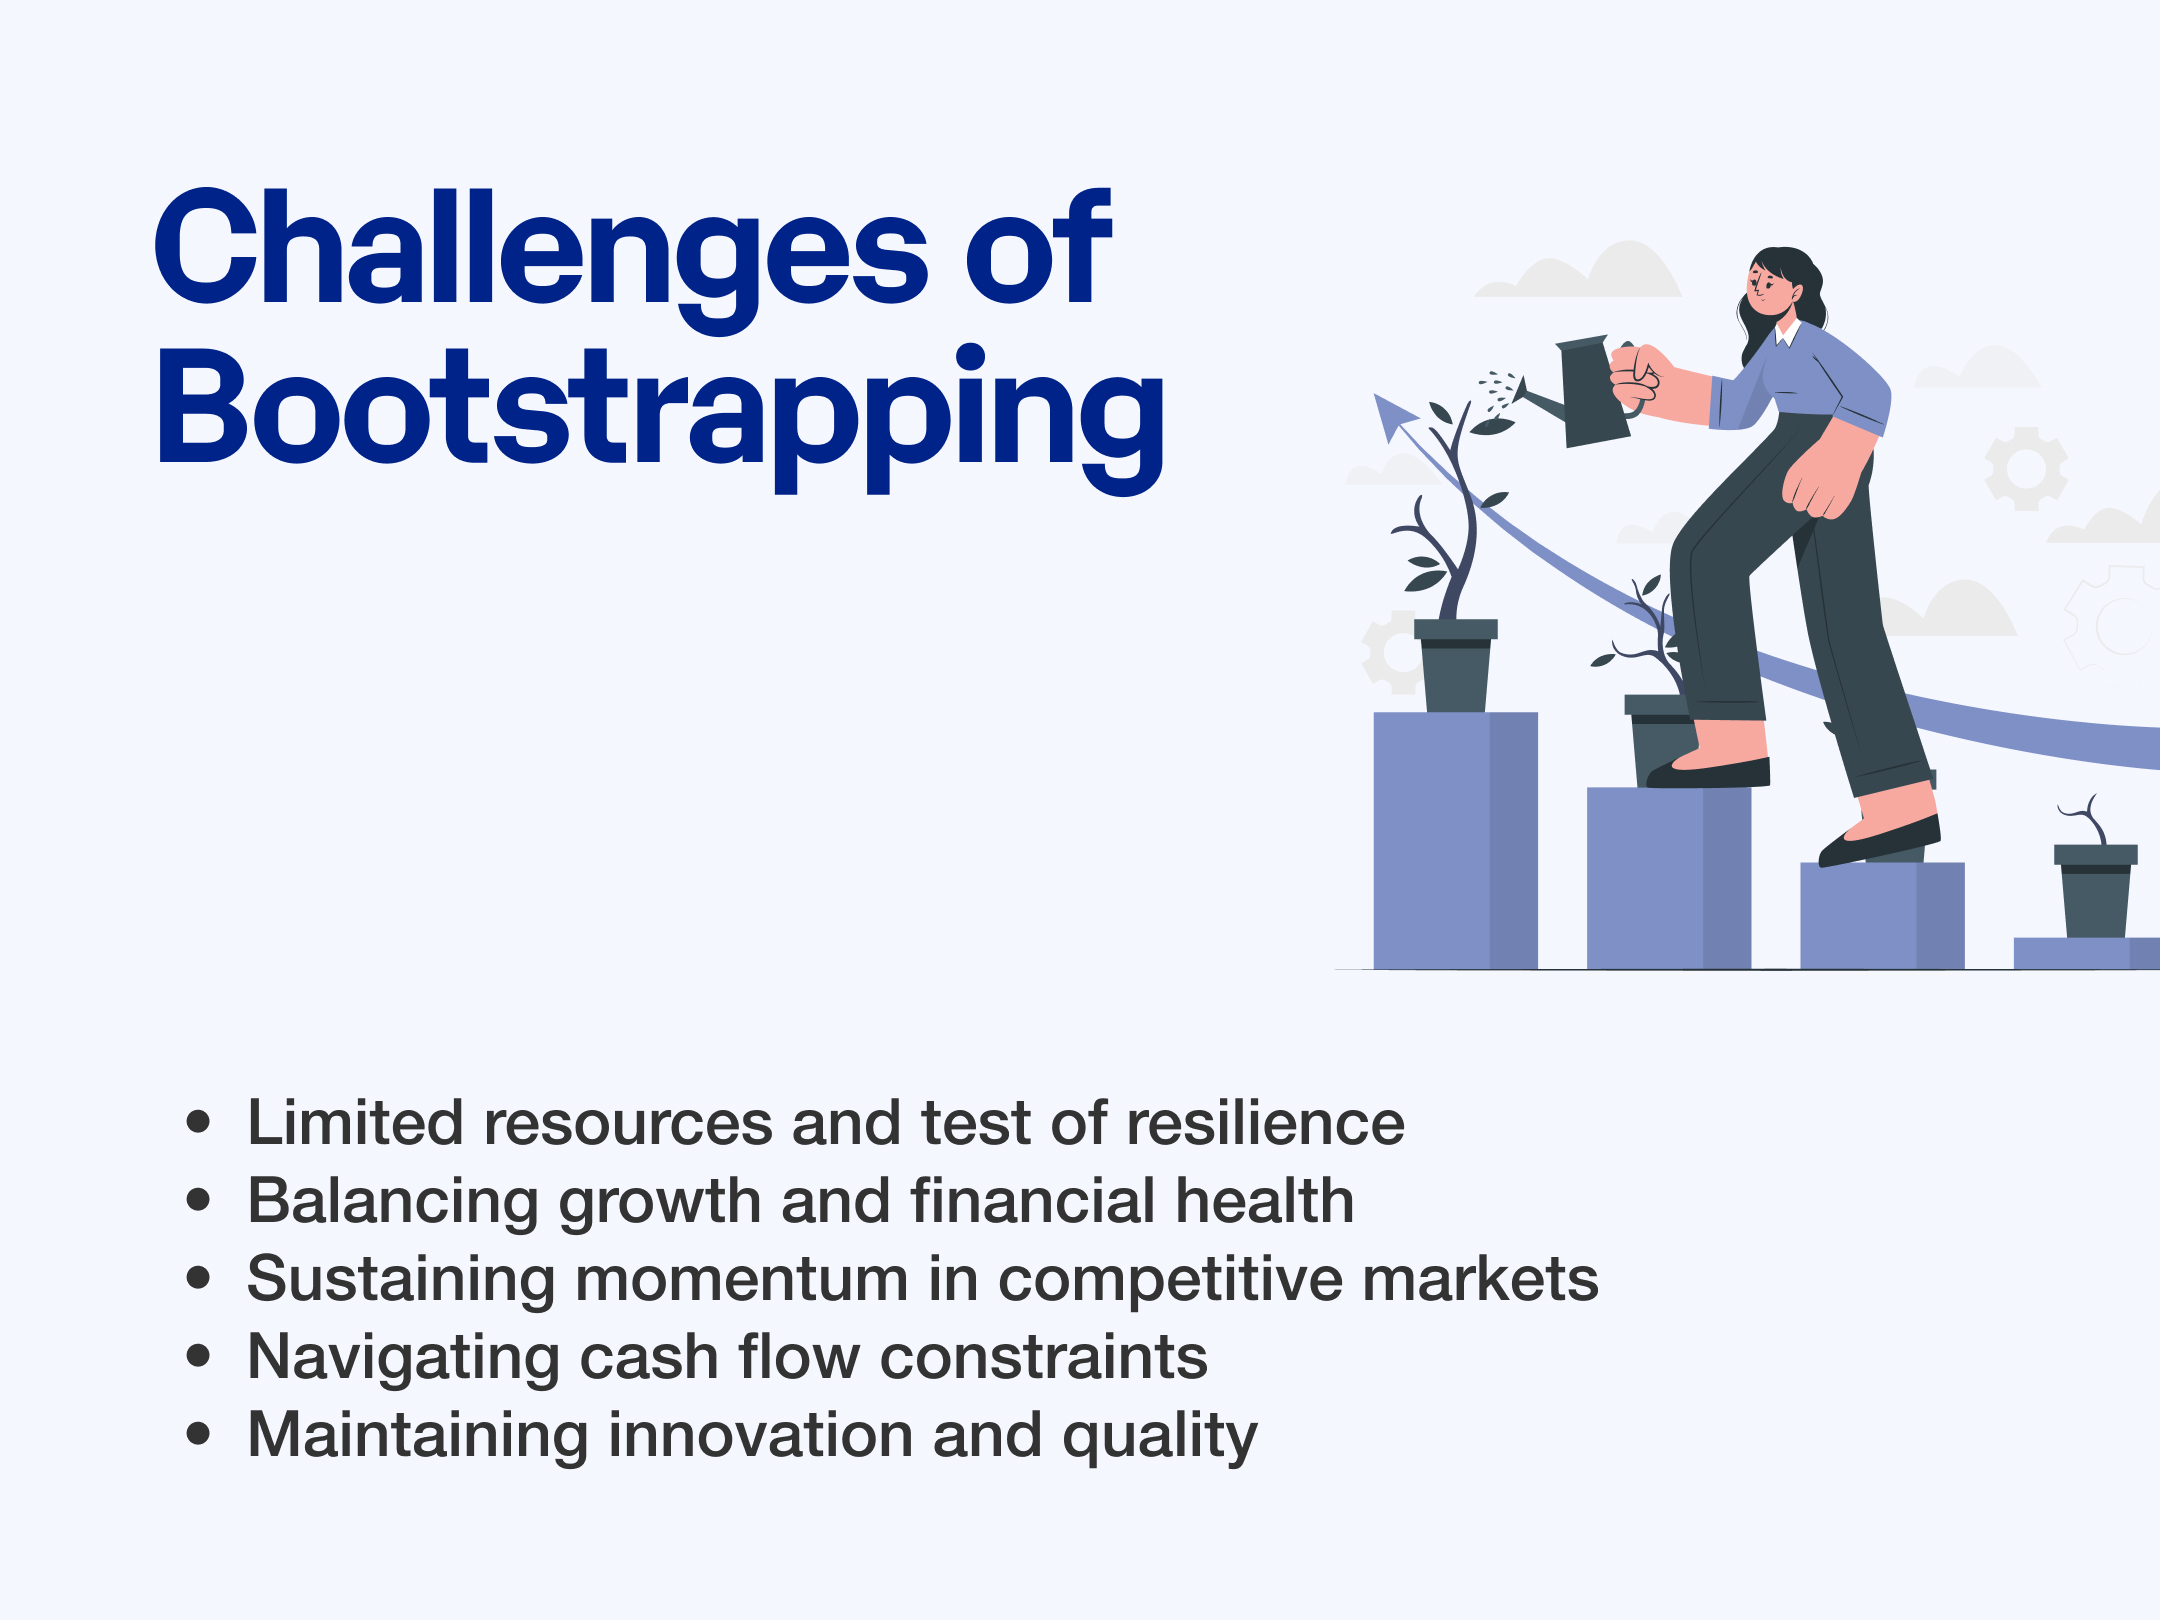 The challenges of bootstrapping a SaaS